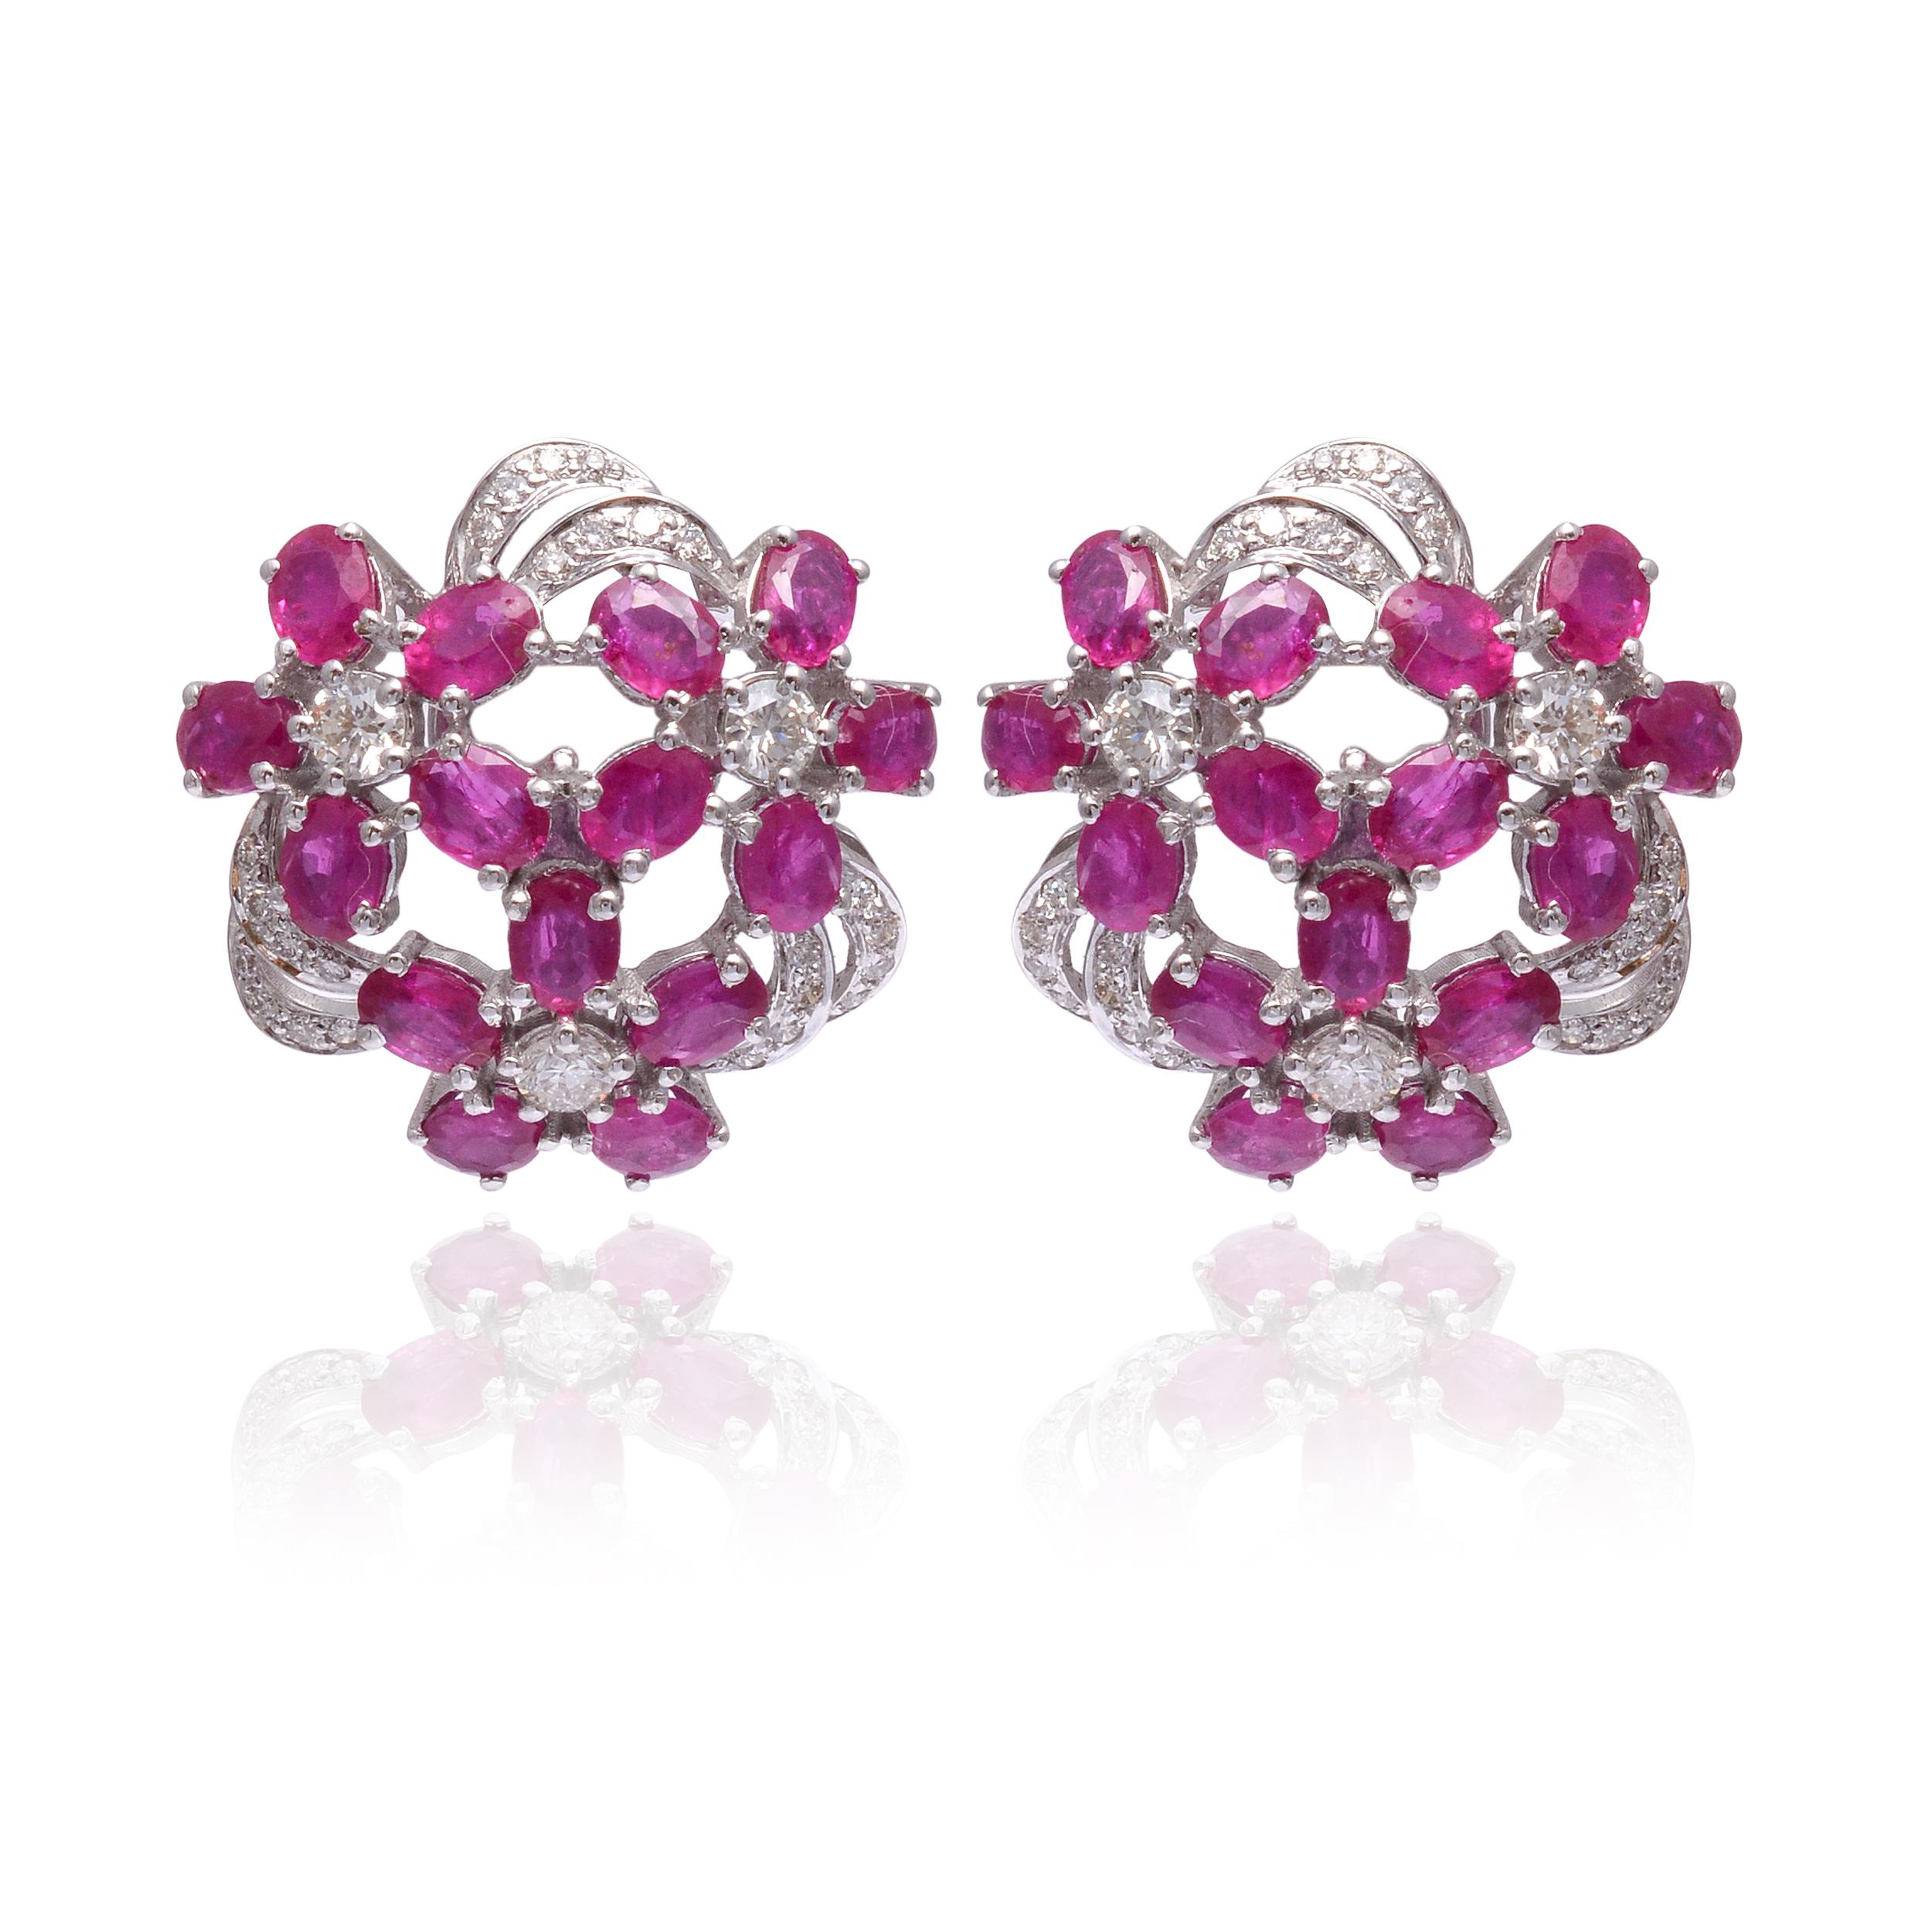 These earrings are made with Ruby gemstones and diamond. They are set in 18K gold. Shine all day long in this delicate pair of stud earrings. Perfect for gifting, they twinkle with timeless elegance. Easy to mix and match with other jewellery